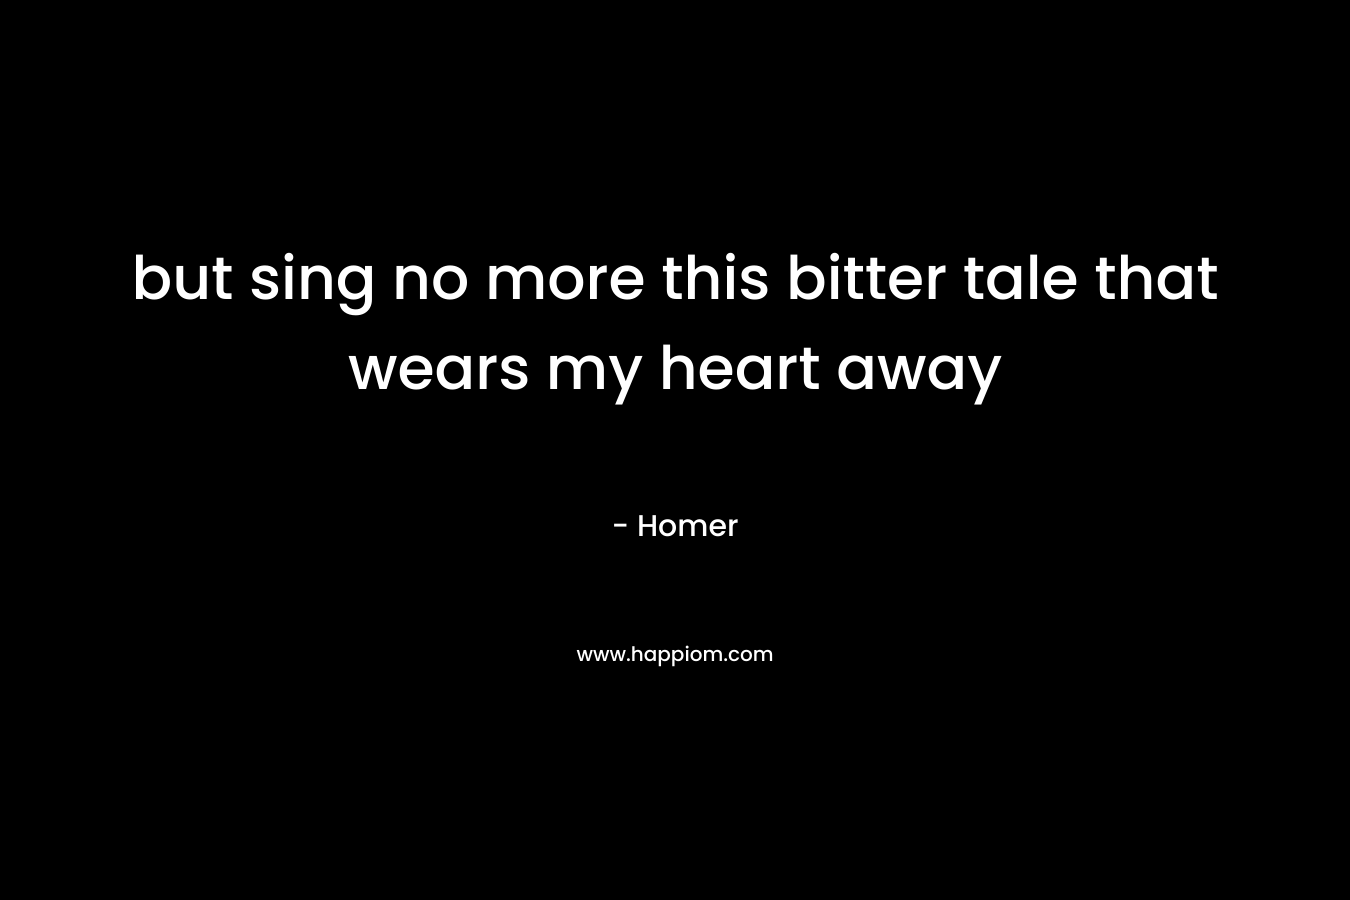 but sing no more this bitter tale that wears my heart away